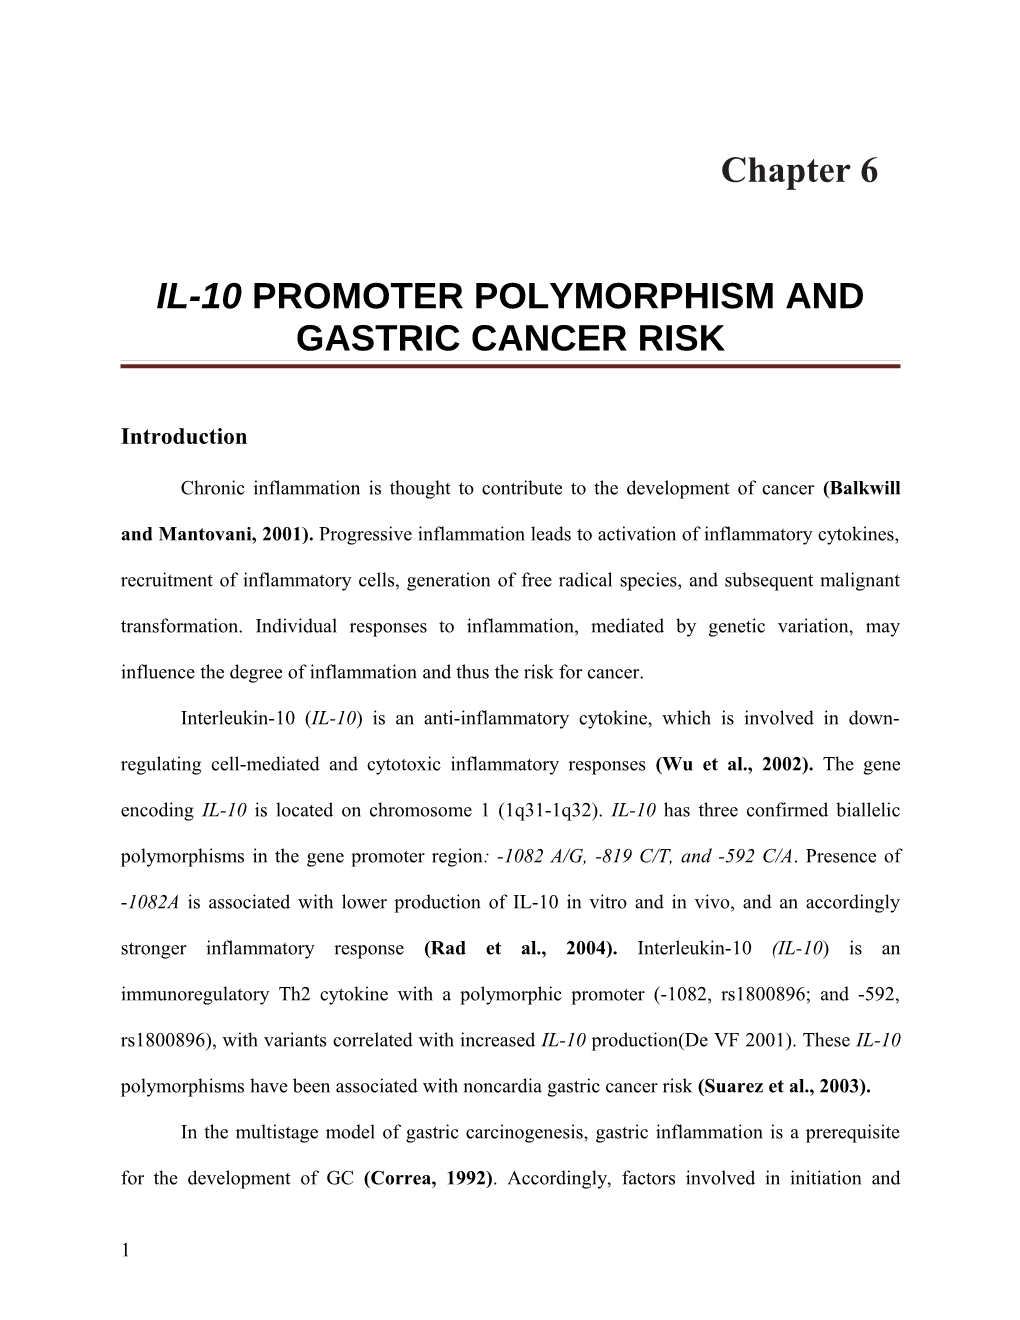 IL-10 Promoter Polymorphism and Gastric Cancer Risk